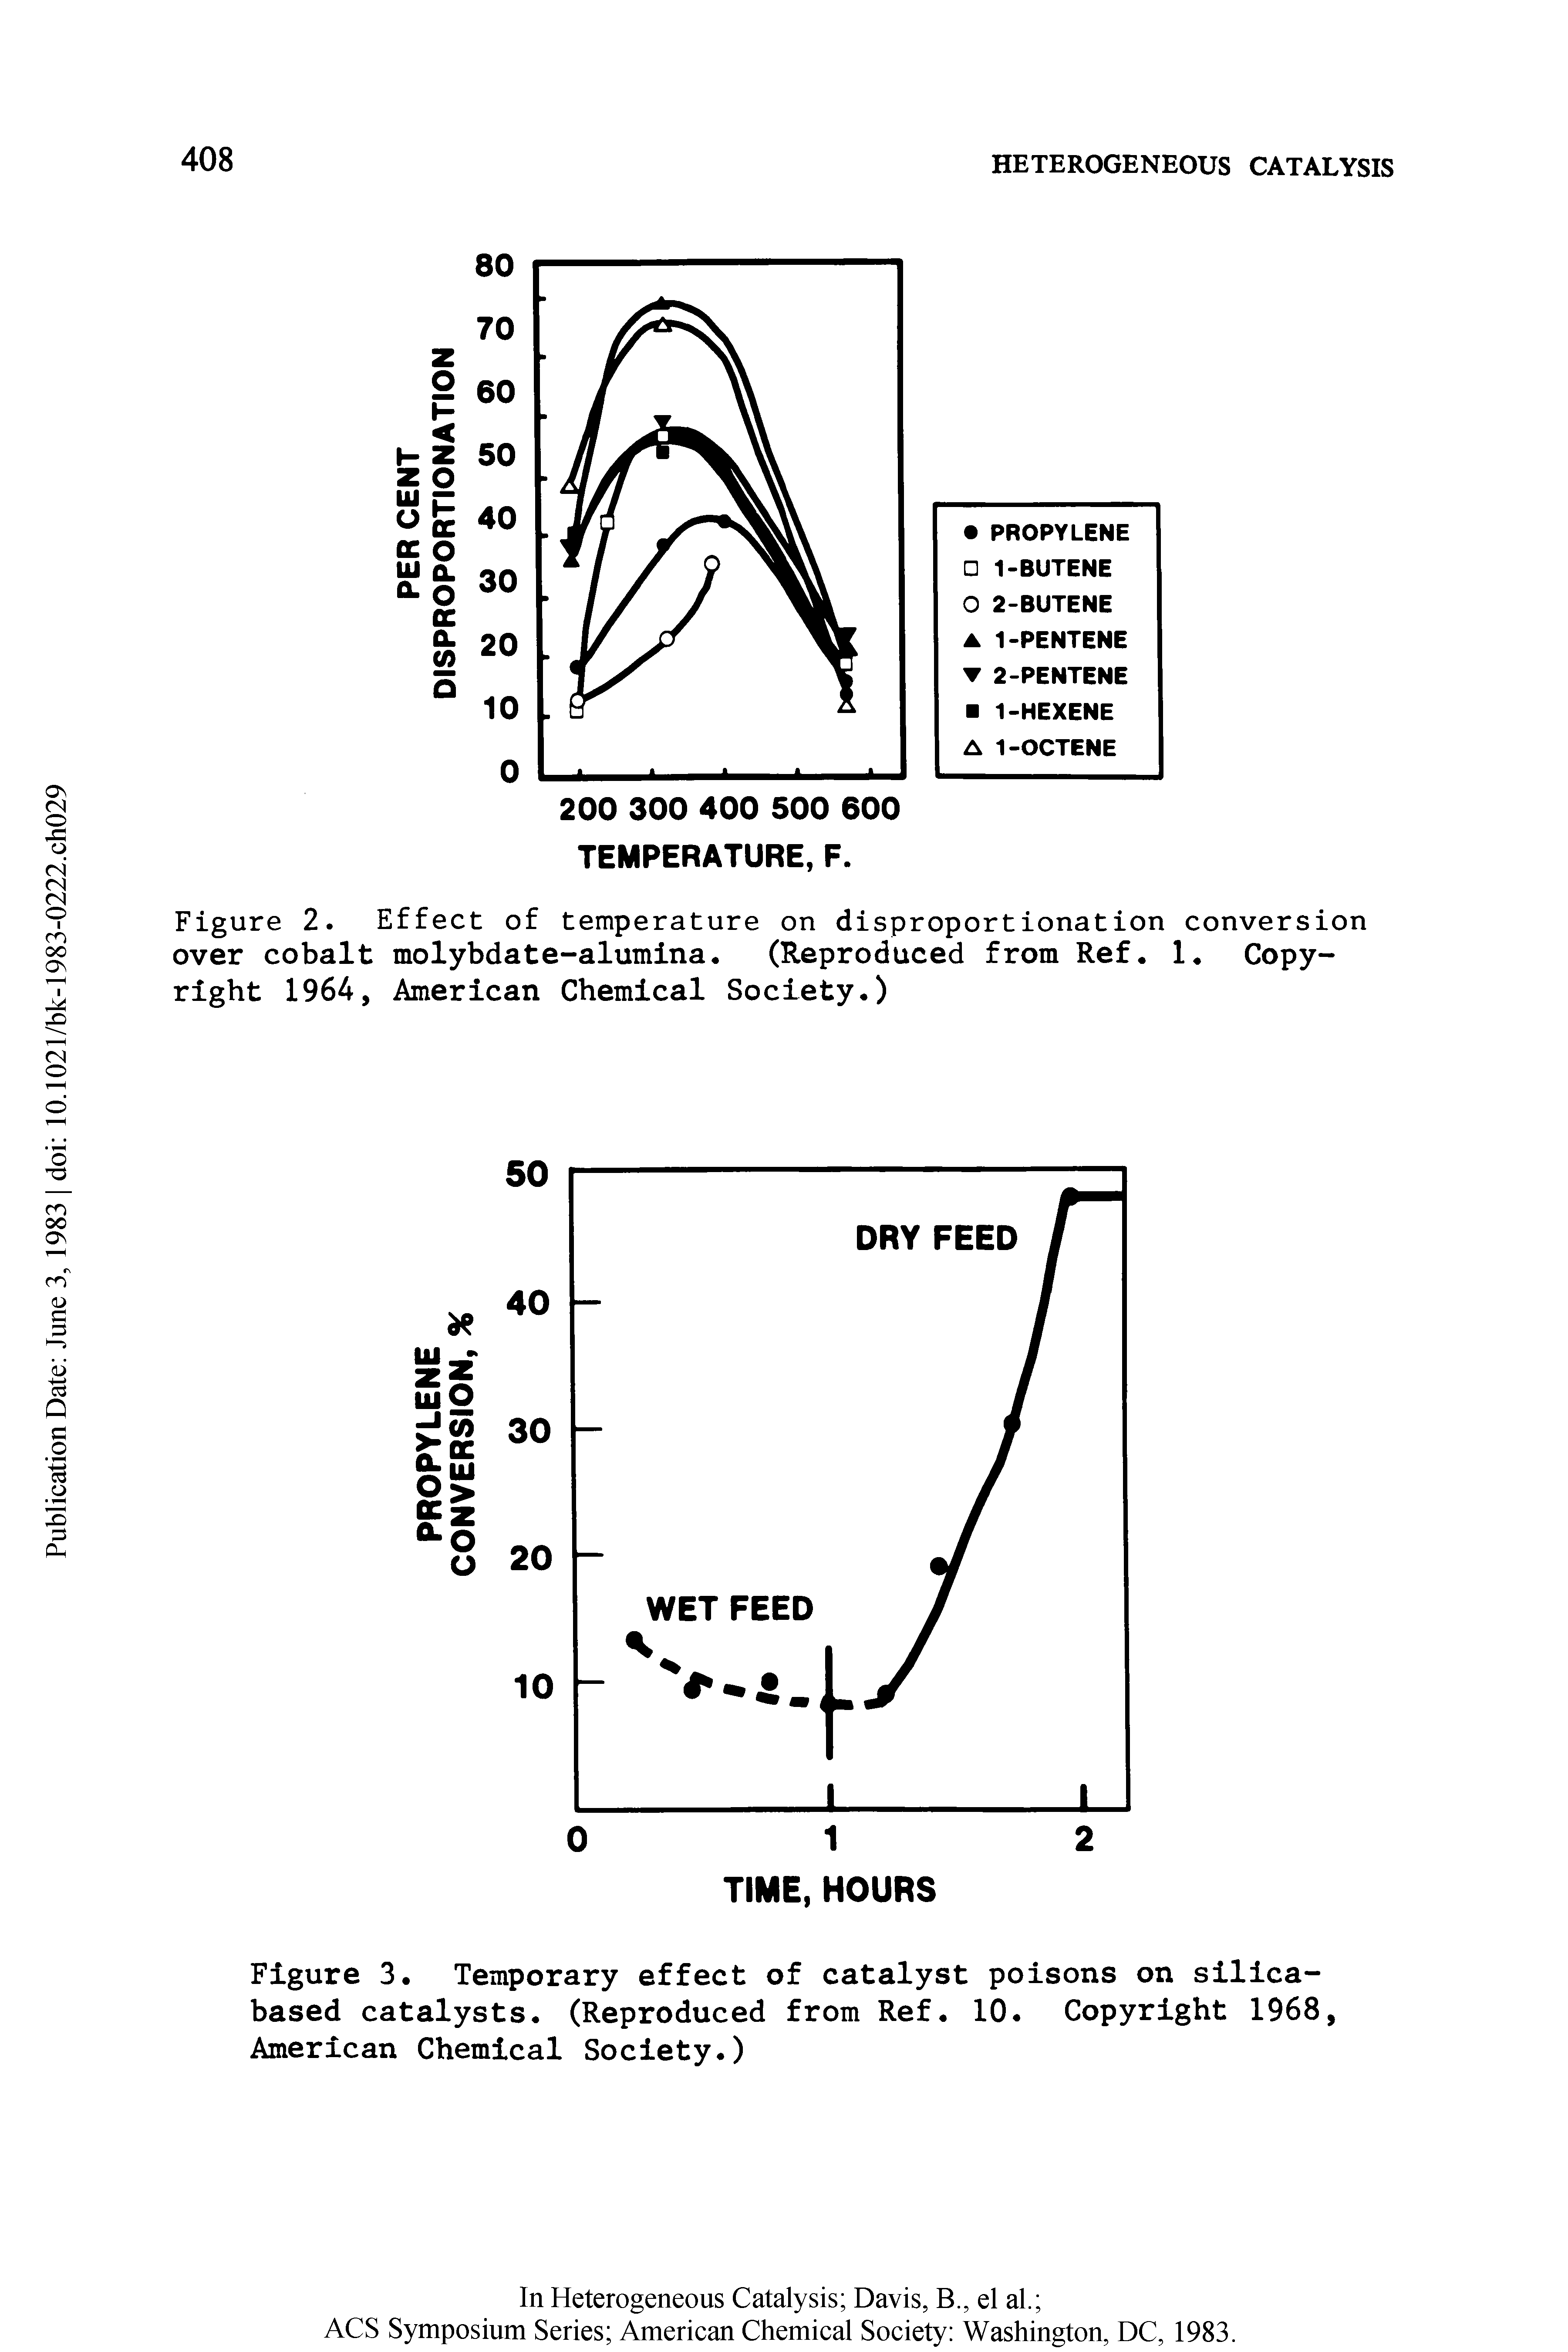 Figure 3. Temporary effect of catalyst poisons on silica-based catalysts. (Reproduced from Ref. 10 Copyright 1968, American Chemical Society.)...